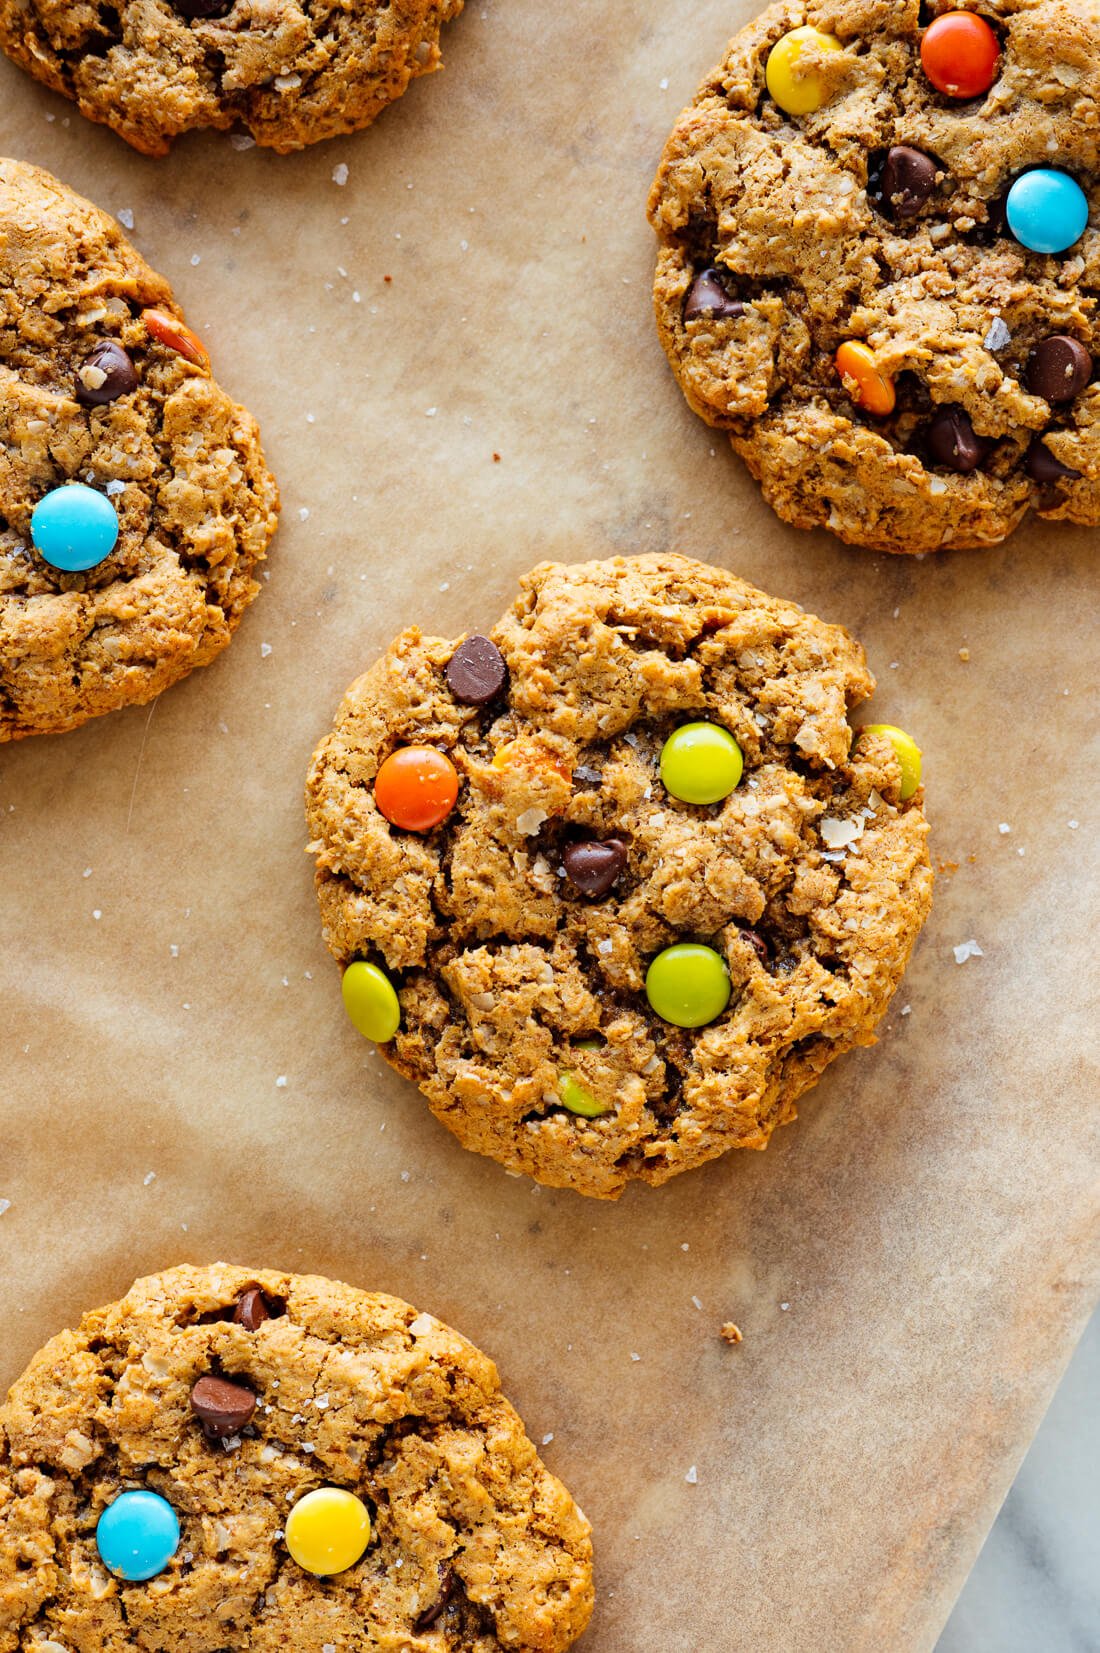 oatmeal peanut butter cookies with chocolate and colored chocolate candies